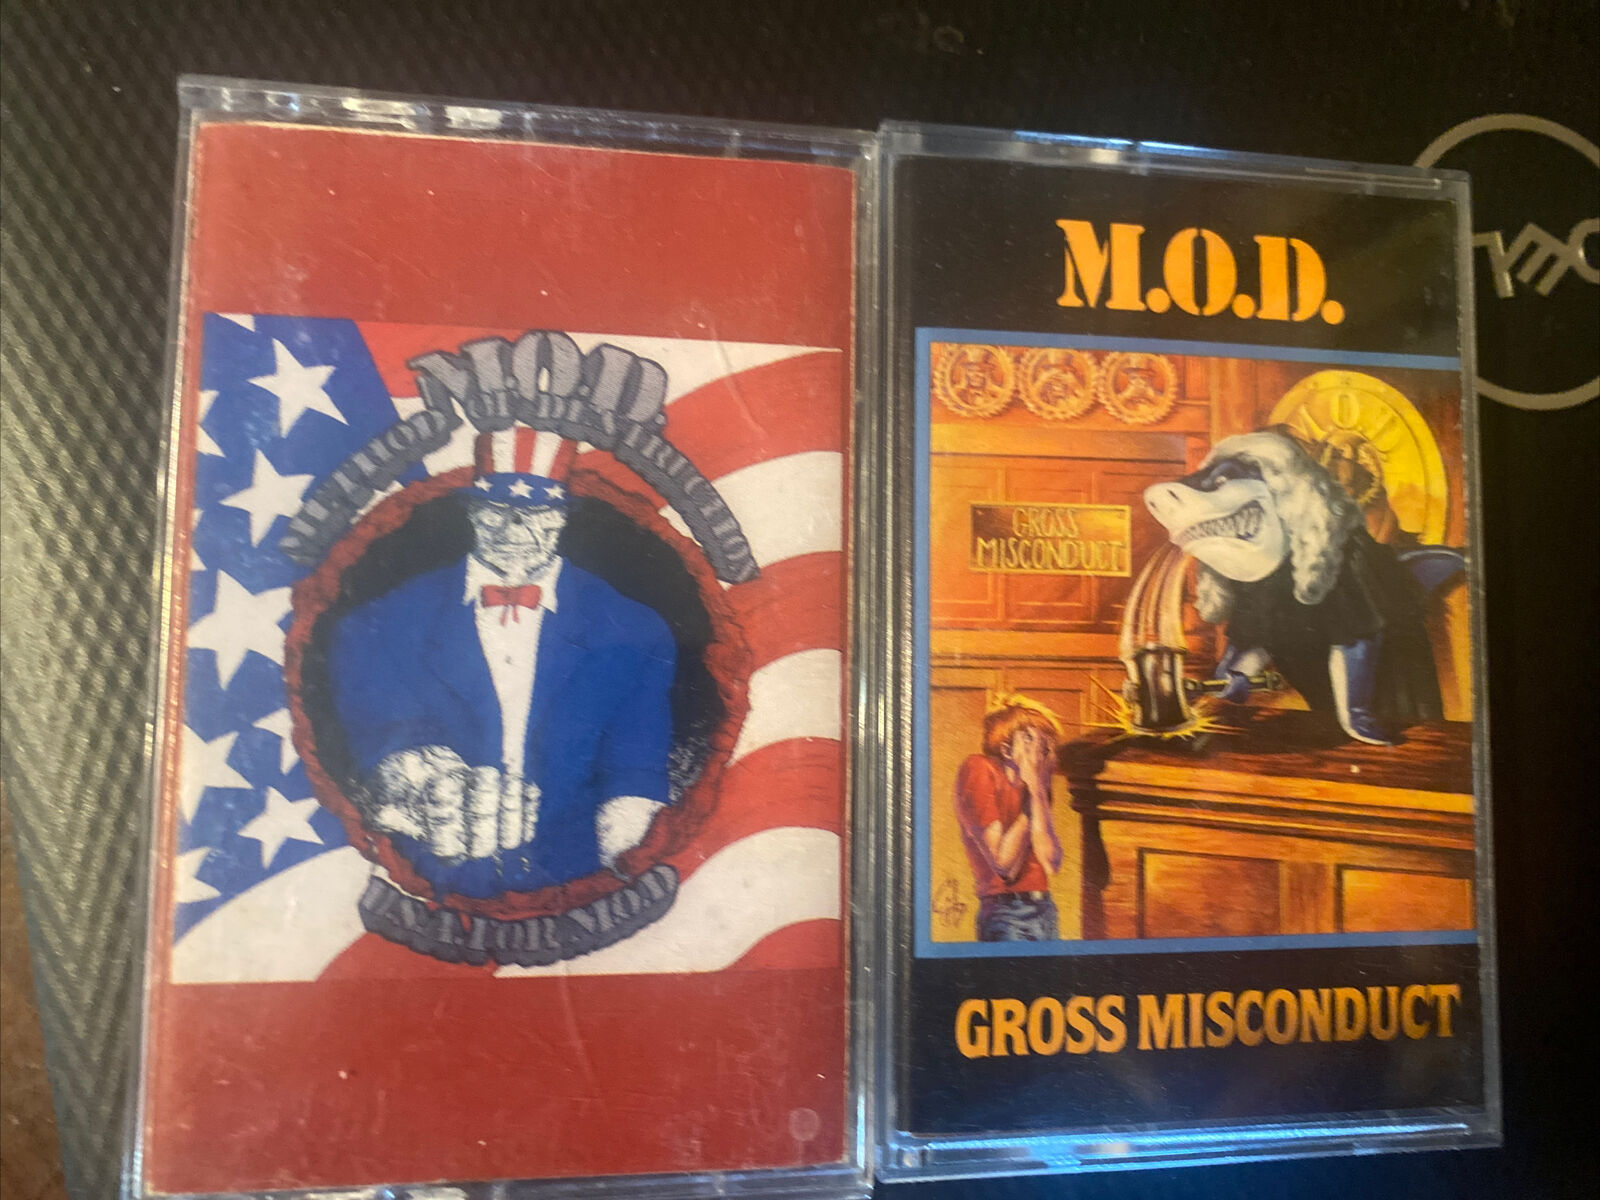 M.O.D. Cassettes Lot X2 USA For Mod And Gross Misconduct